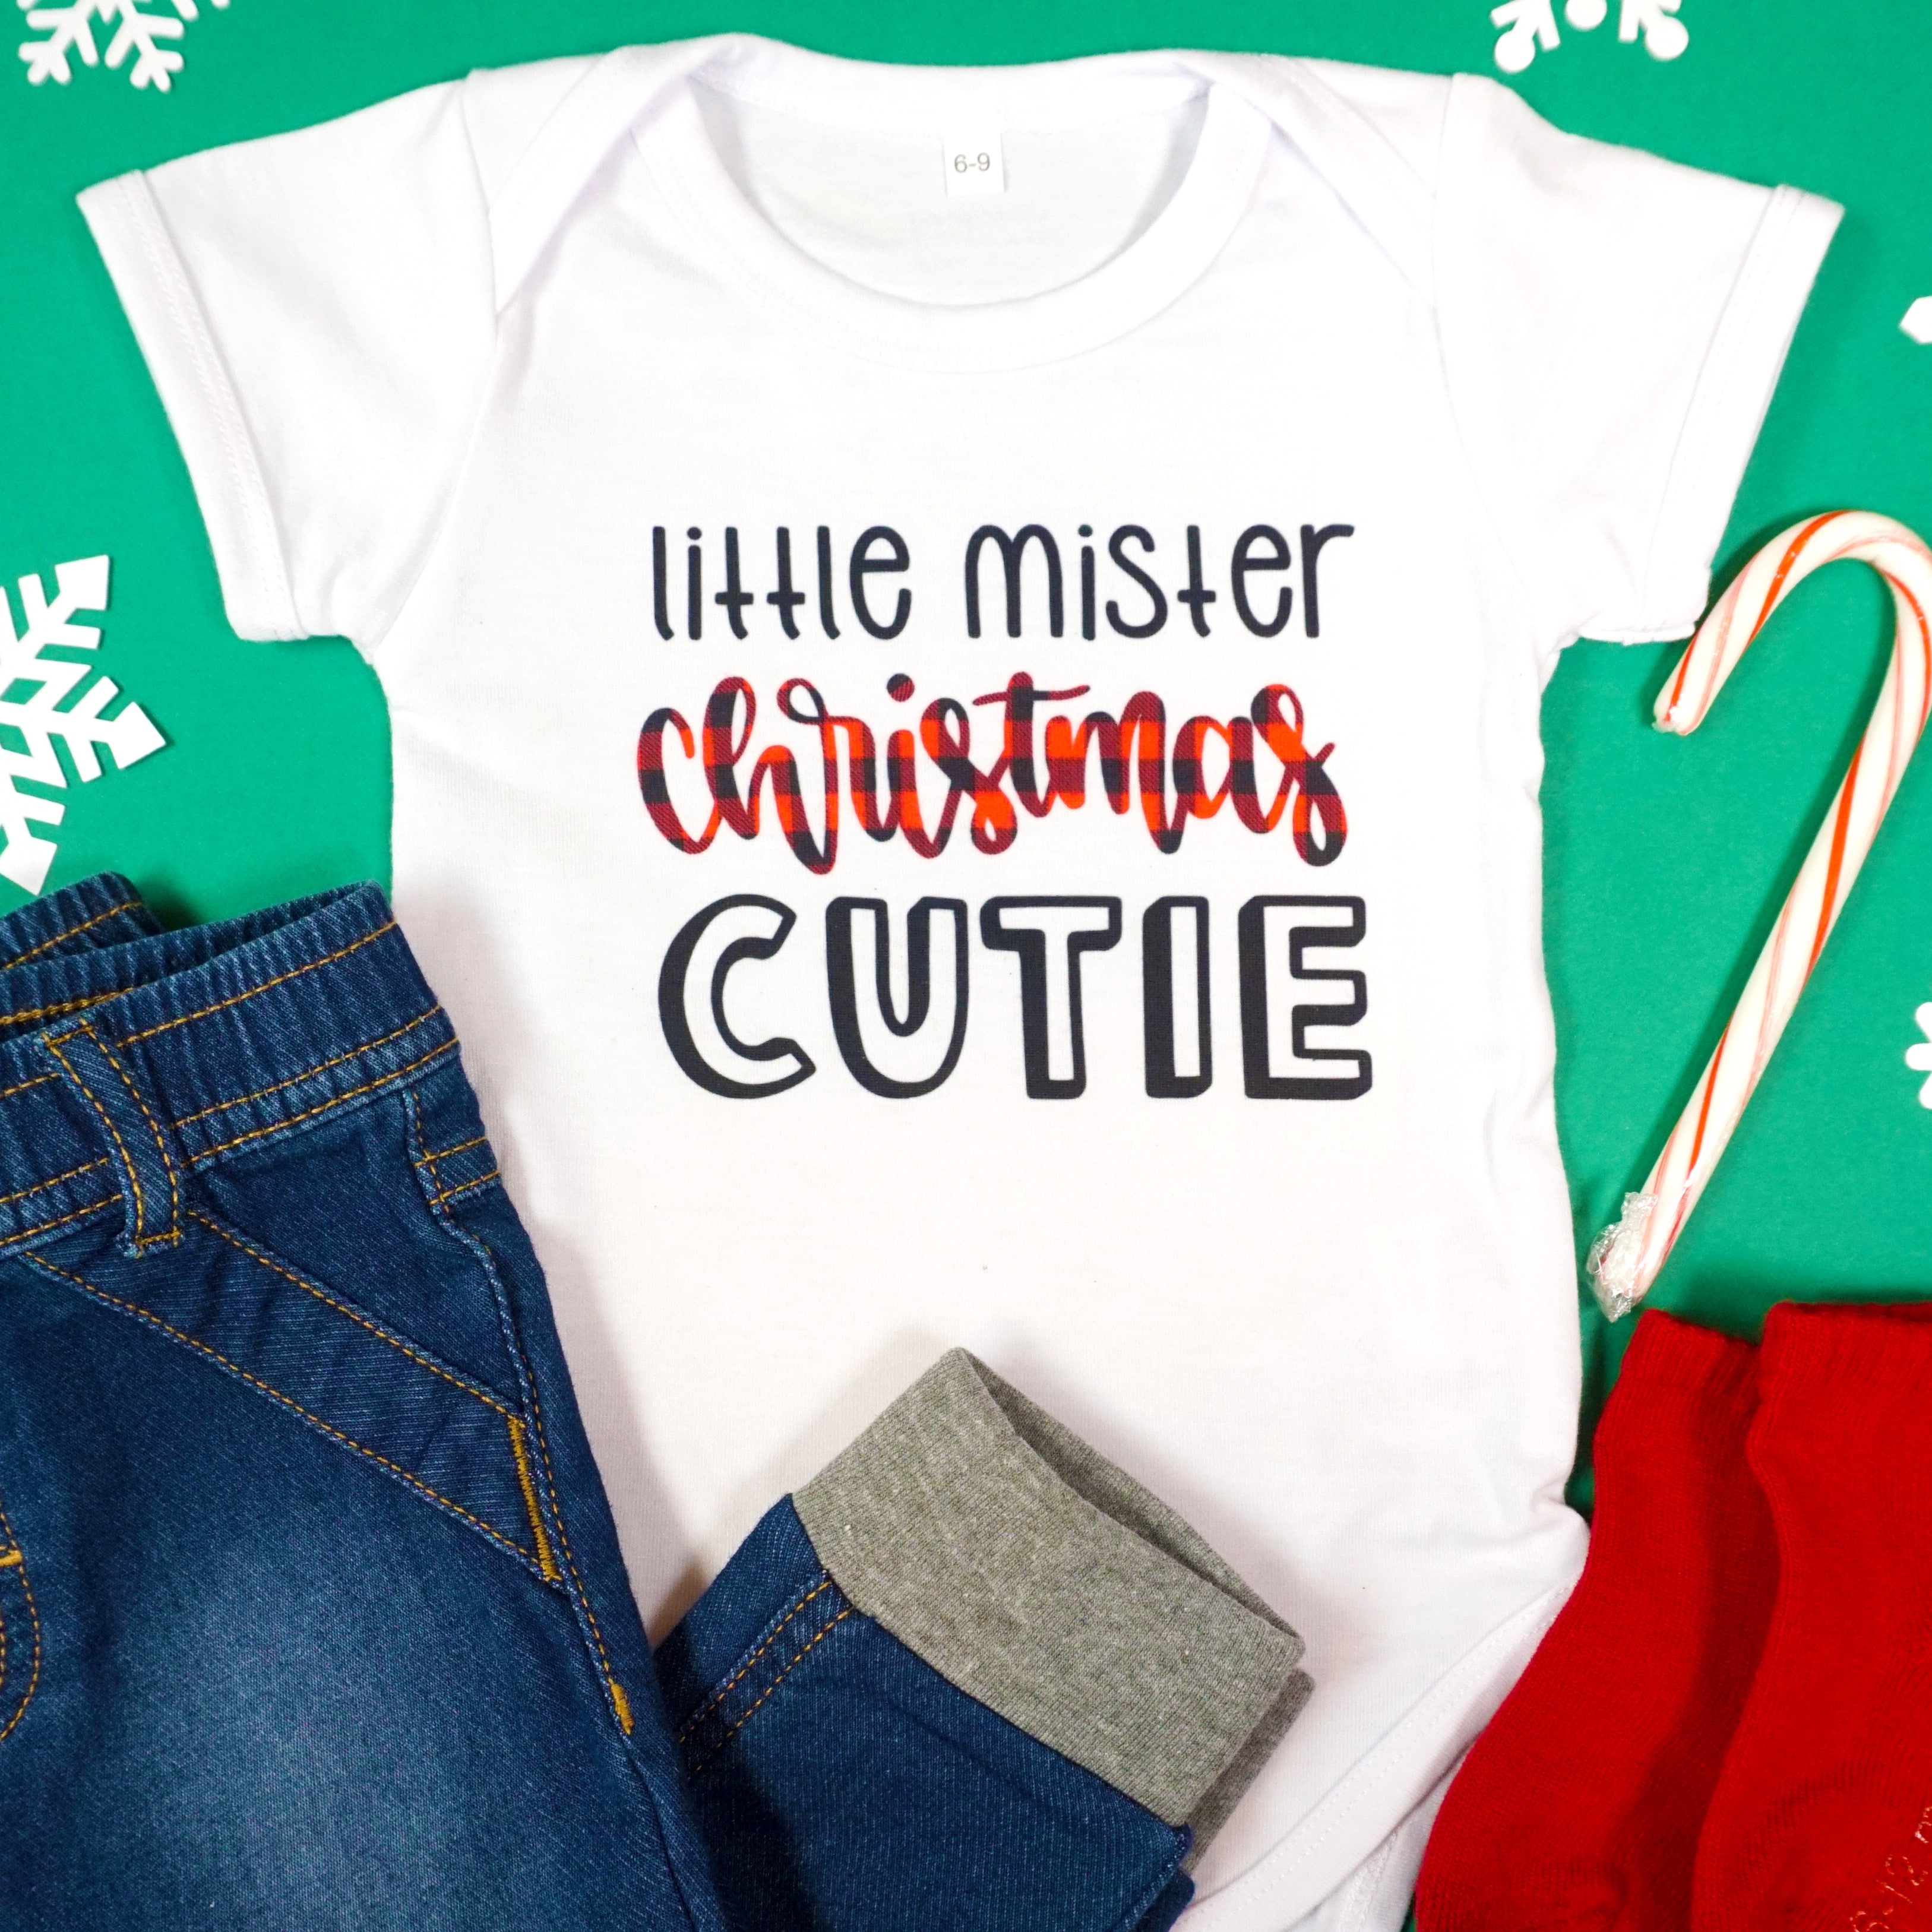 little mister christmas cutie shirt with candy cane and accessories 